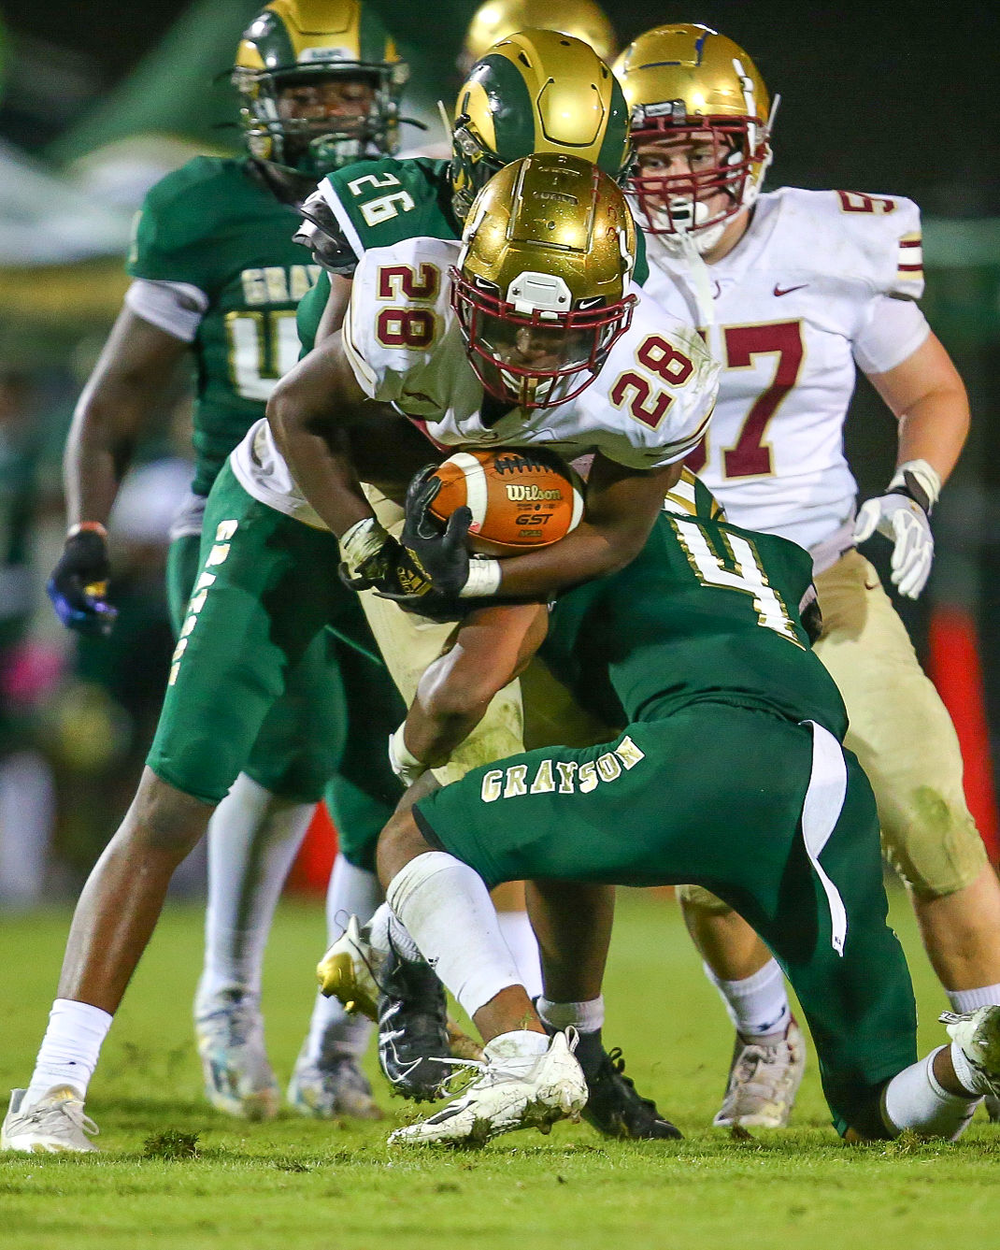 High school football teams Grayson (in green) and Brookwood contend on the field Oct. 22, 2021.